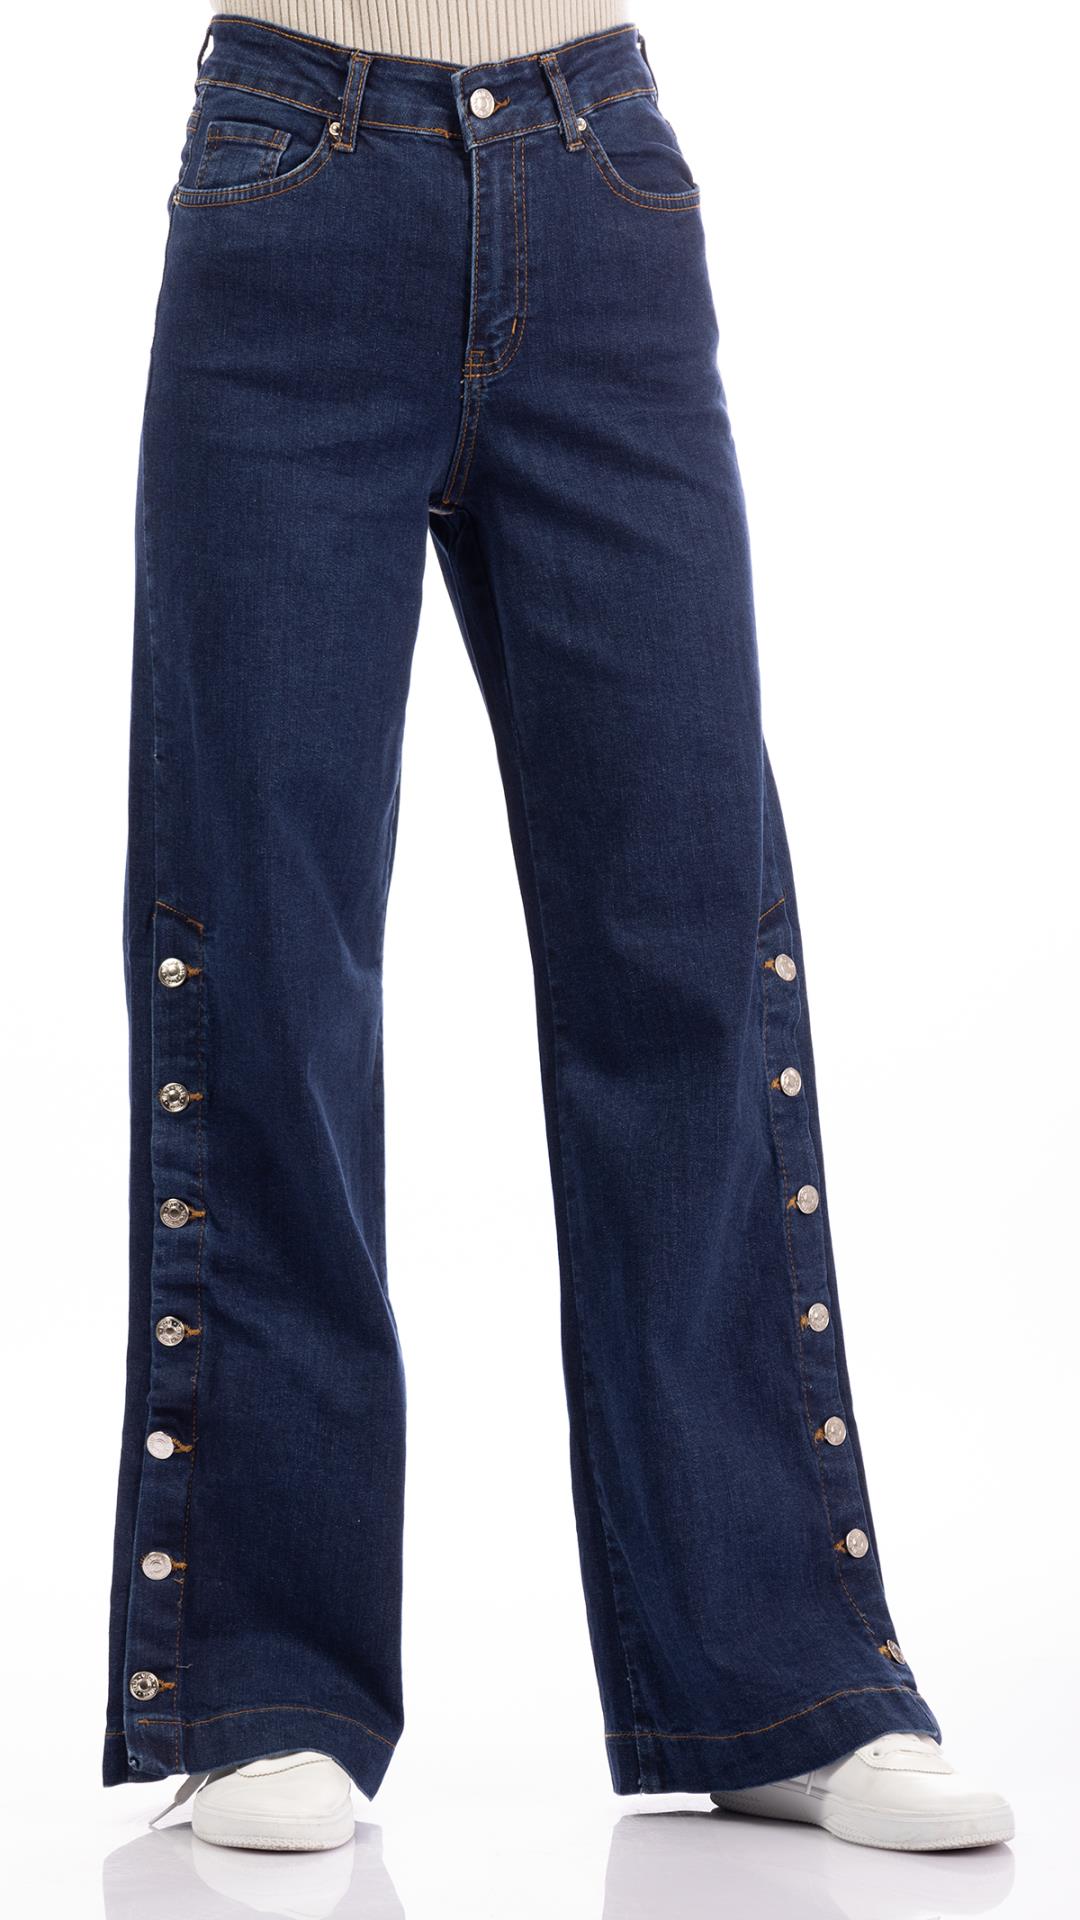 jeans with buttons on the bottom 